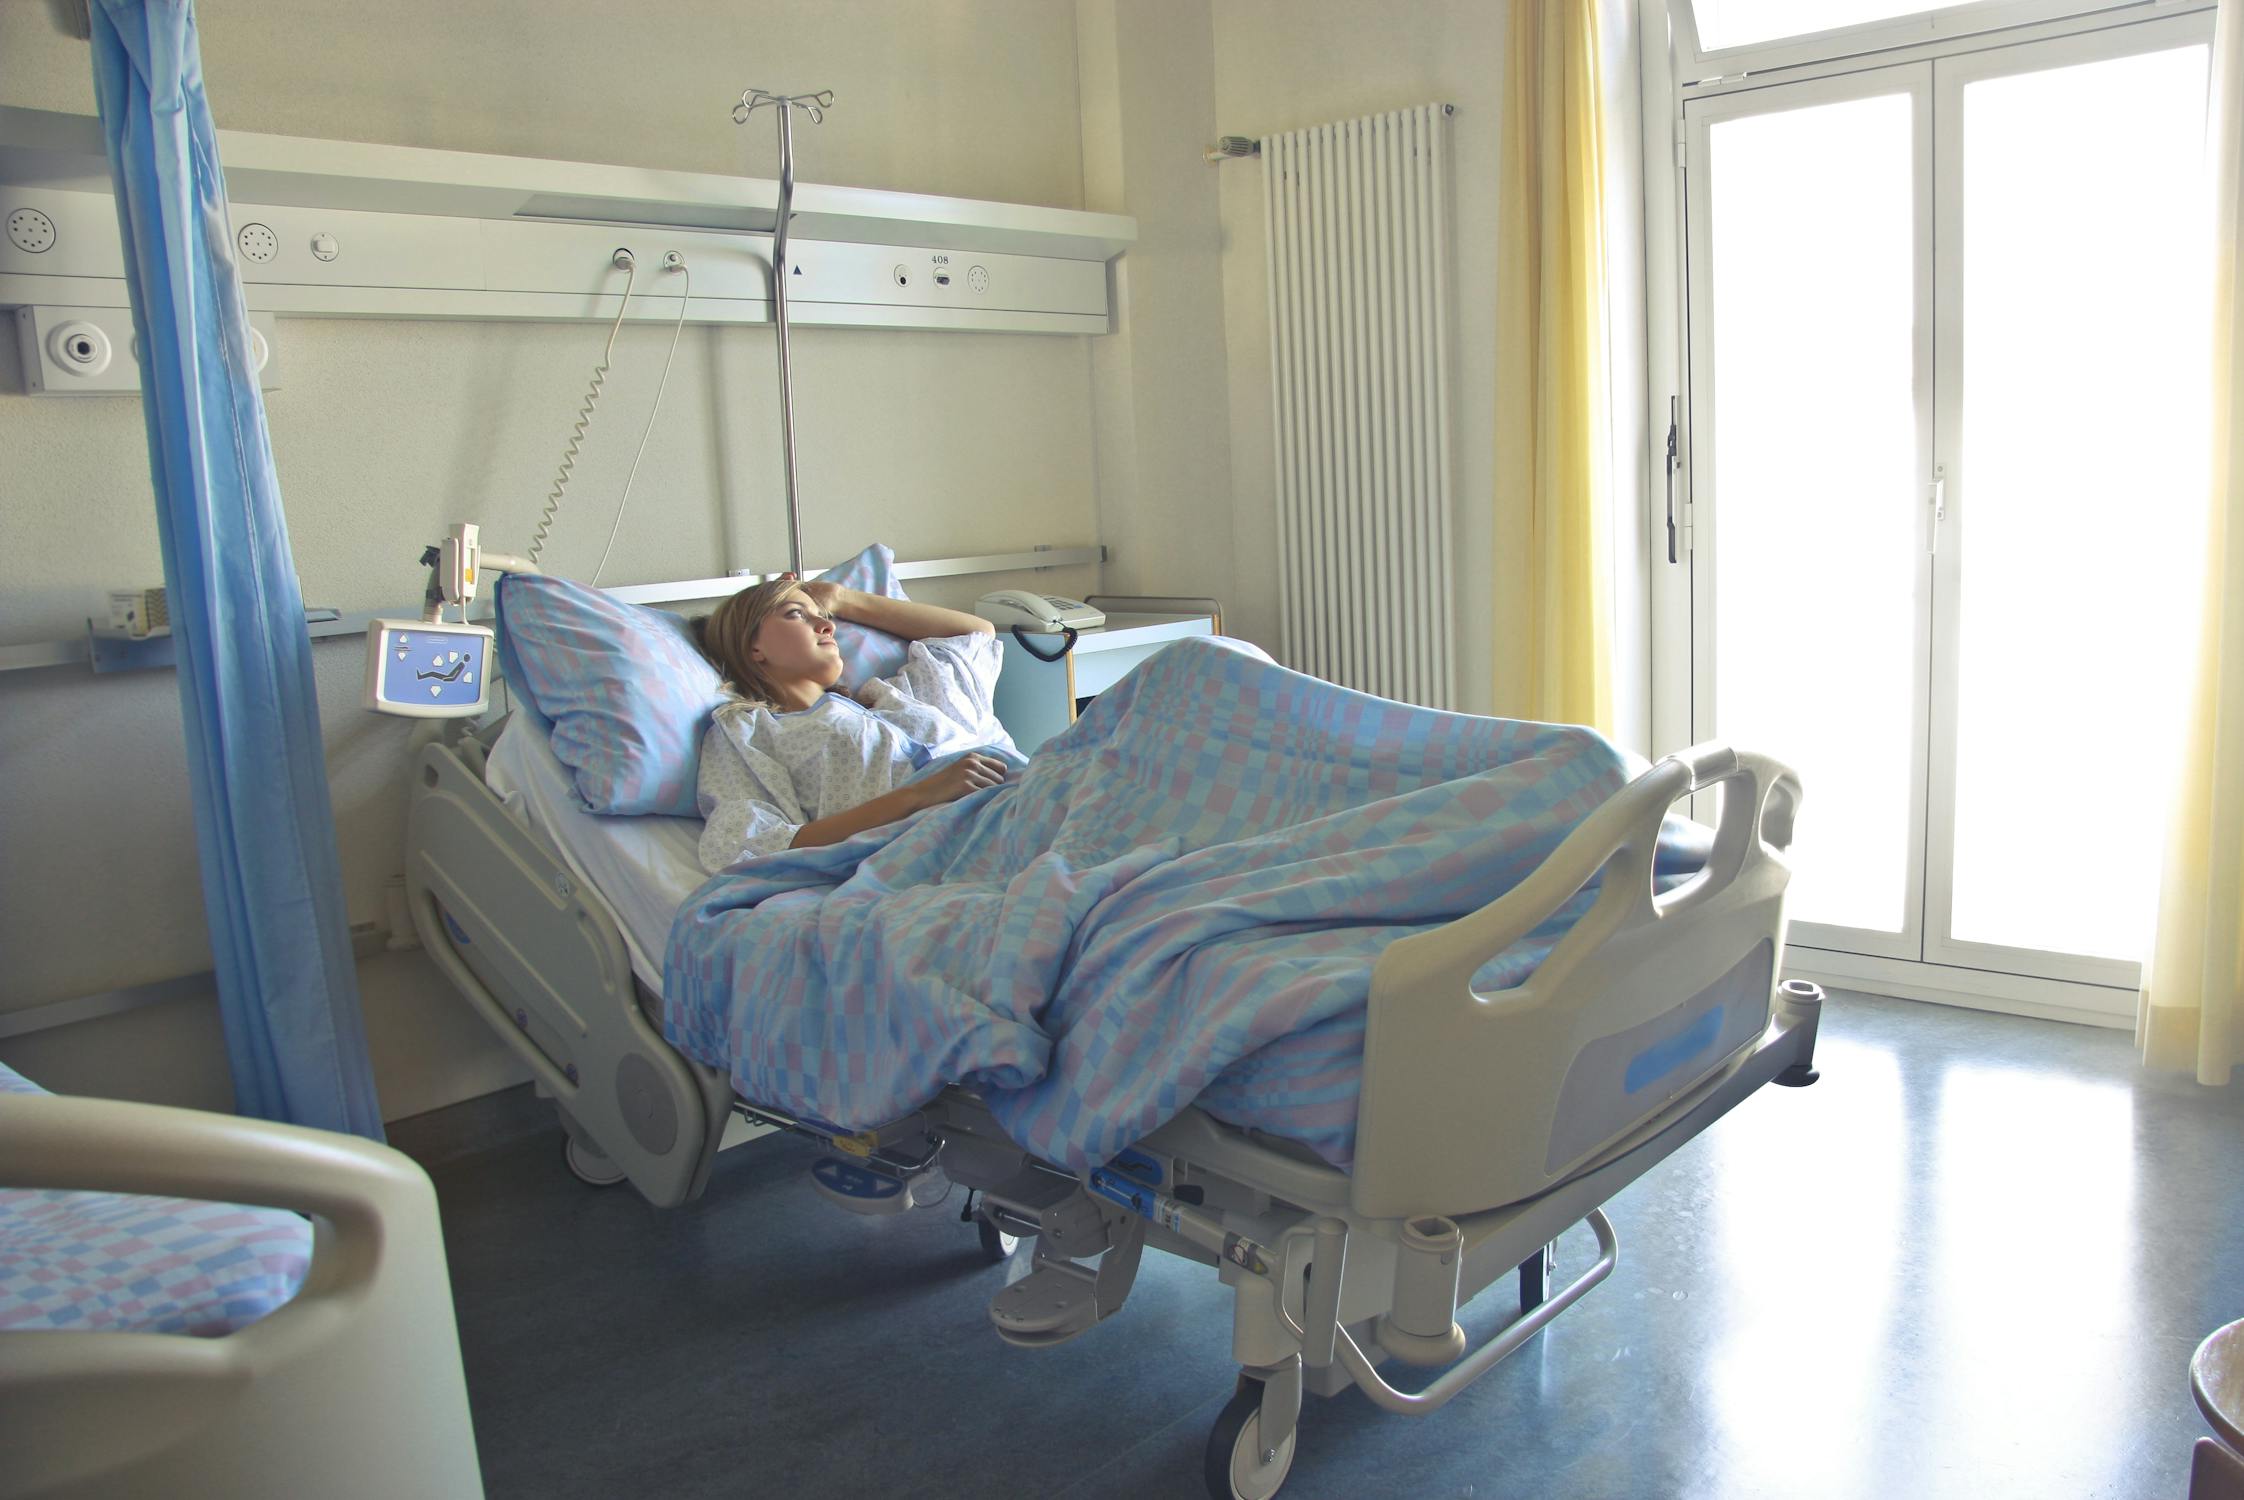 A woman lays in a hospital bed staring out the window